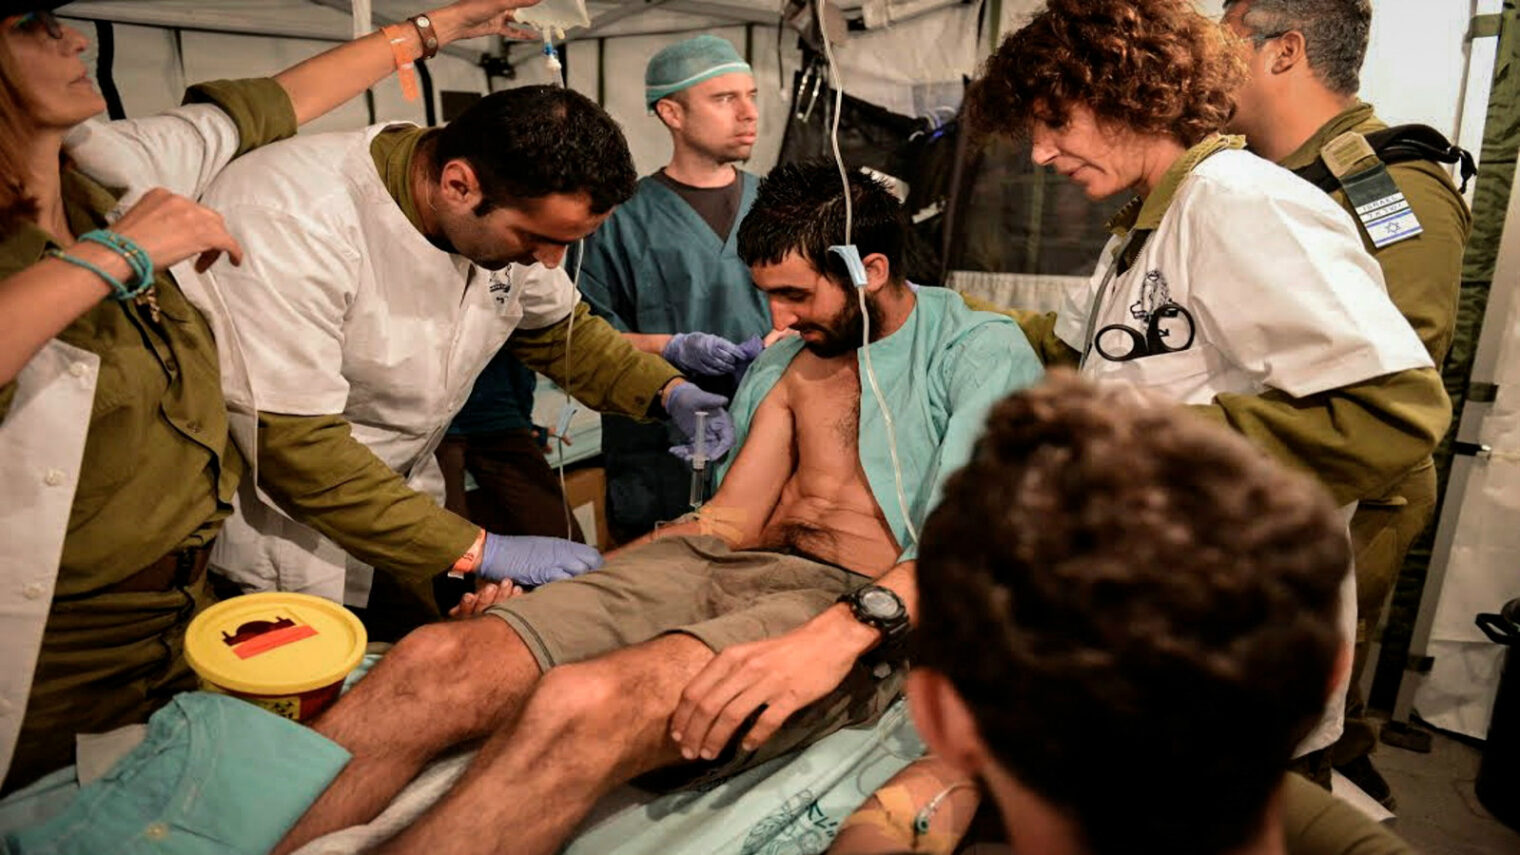 Hundreds of casualties were tended at the IDF field hospital in Kathmandu, Nepal, after the earthquake earlier this year. Photo by IDF Spokesperson via FLASH90